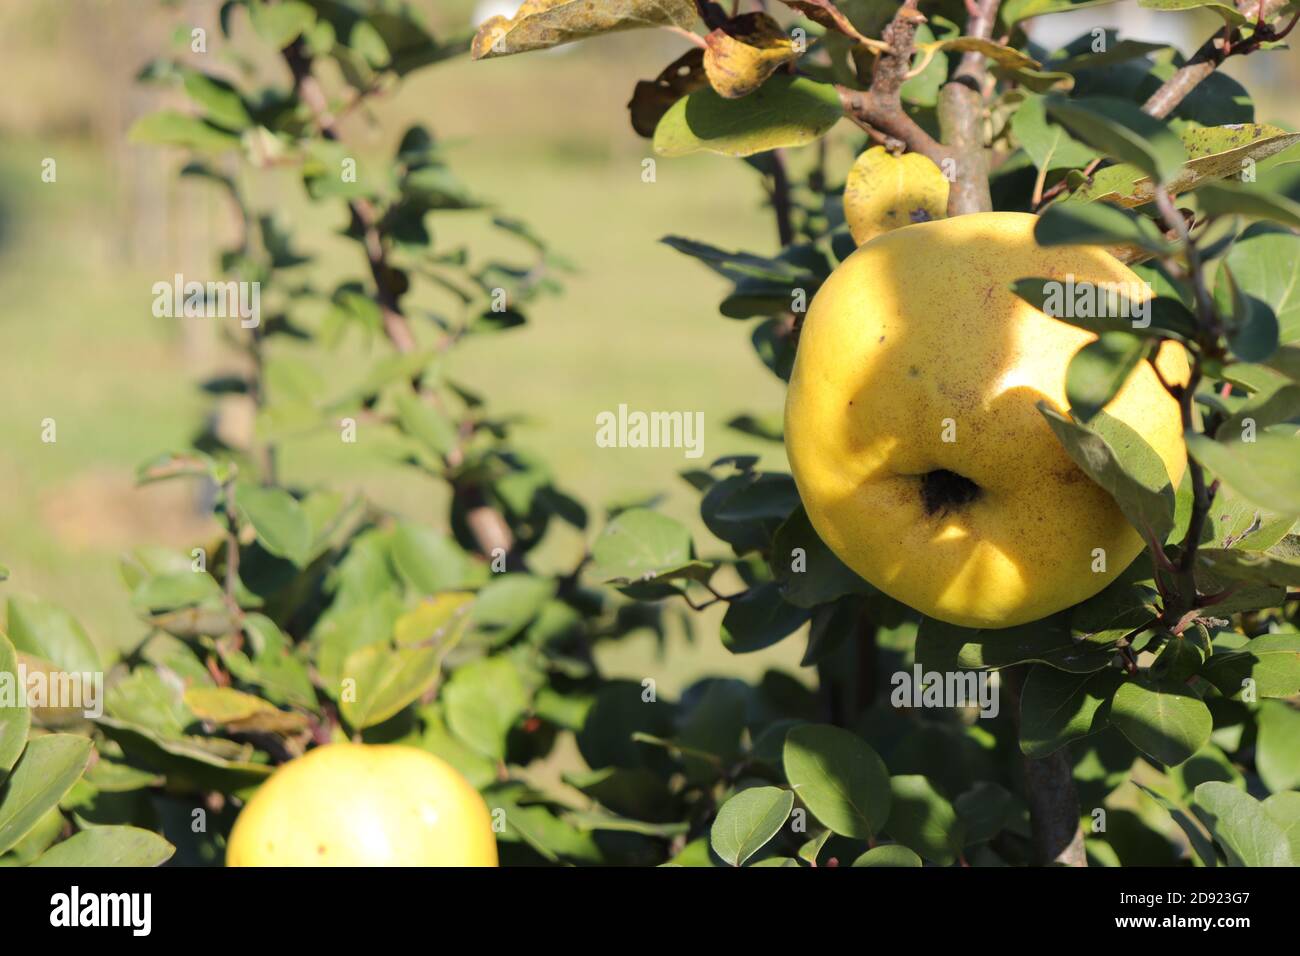 Ripe fruits of yellow apples on the branches, Malus domestica Stock Photo